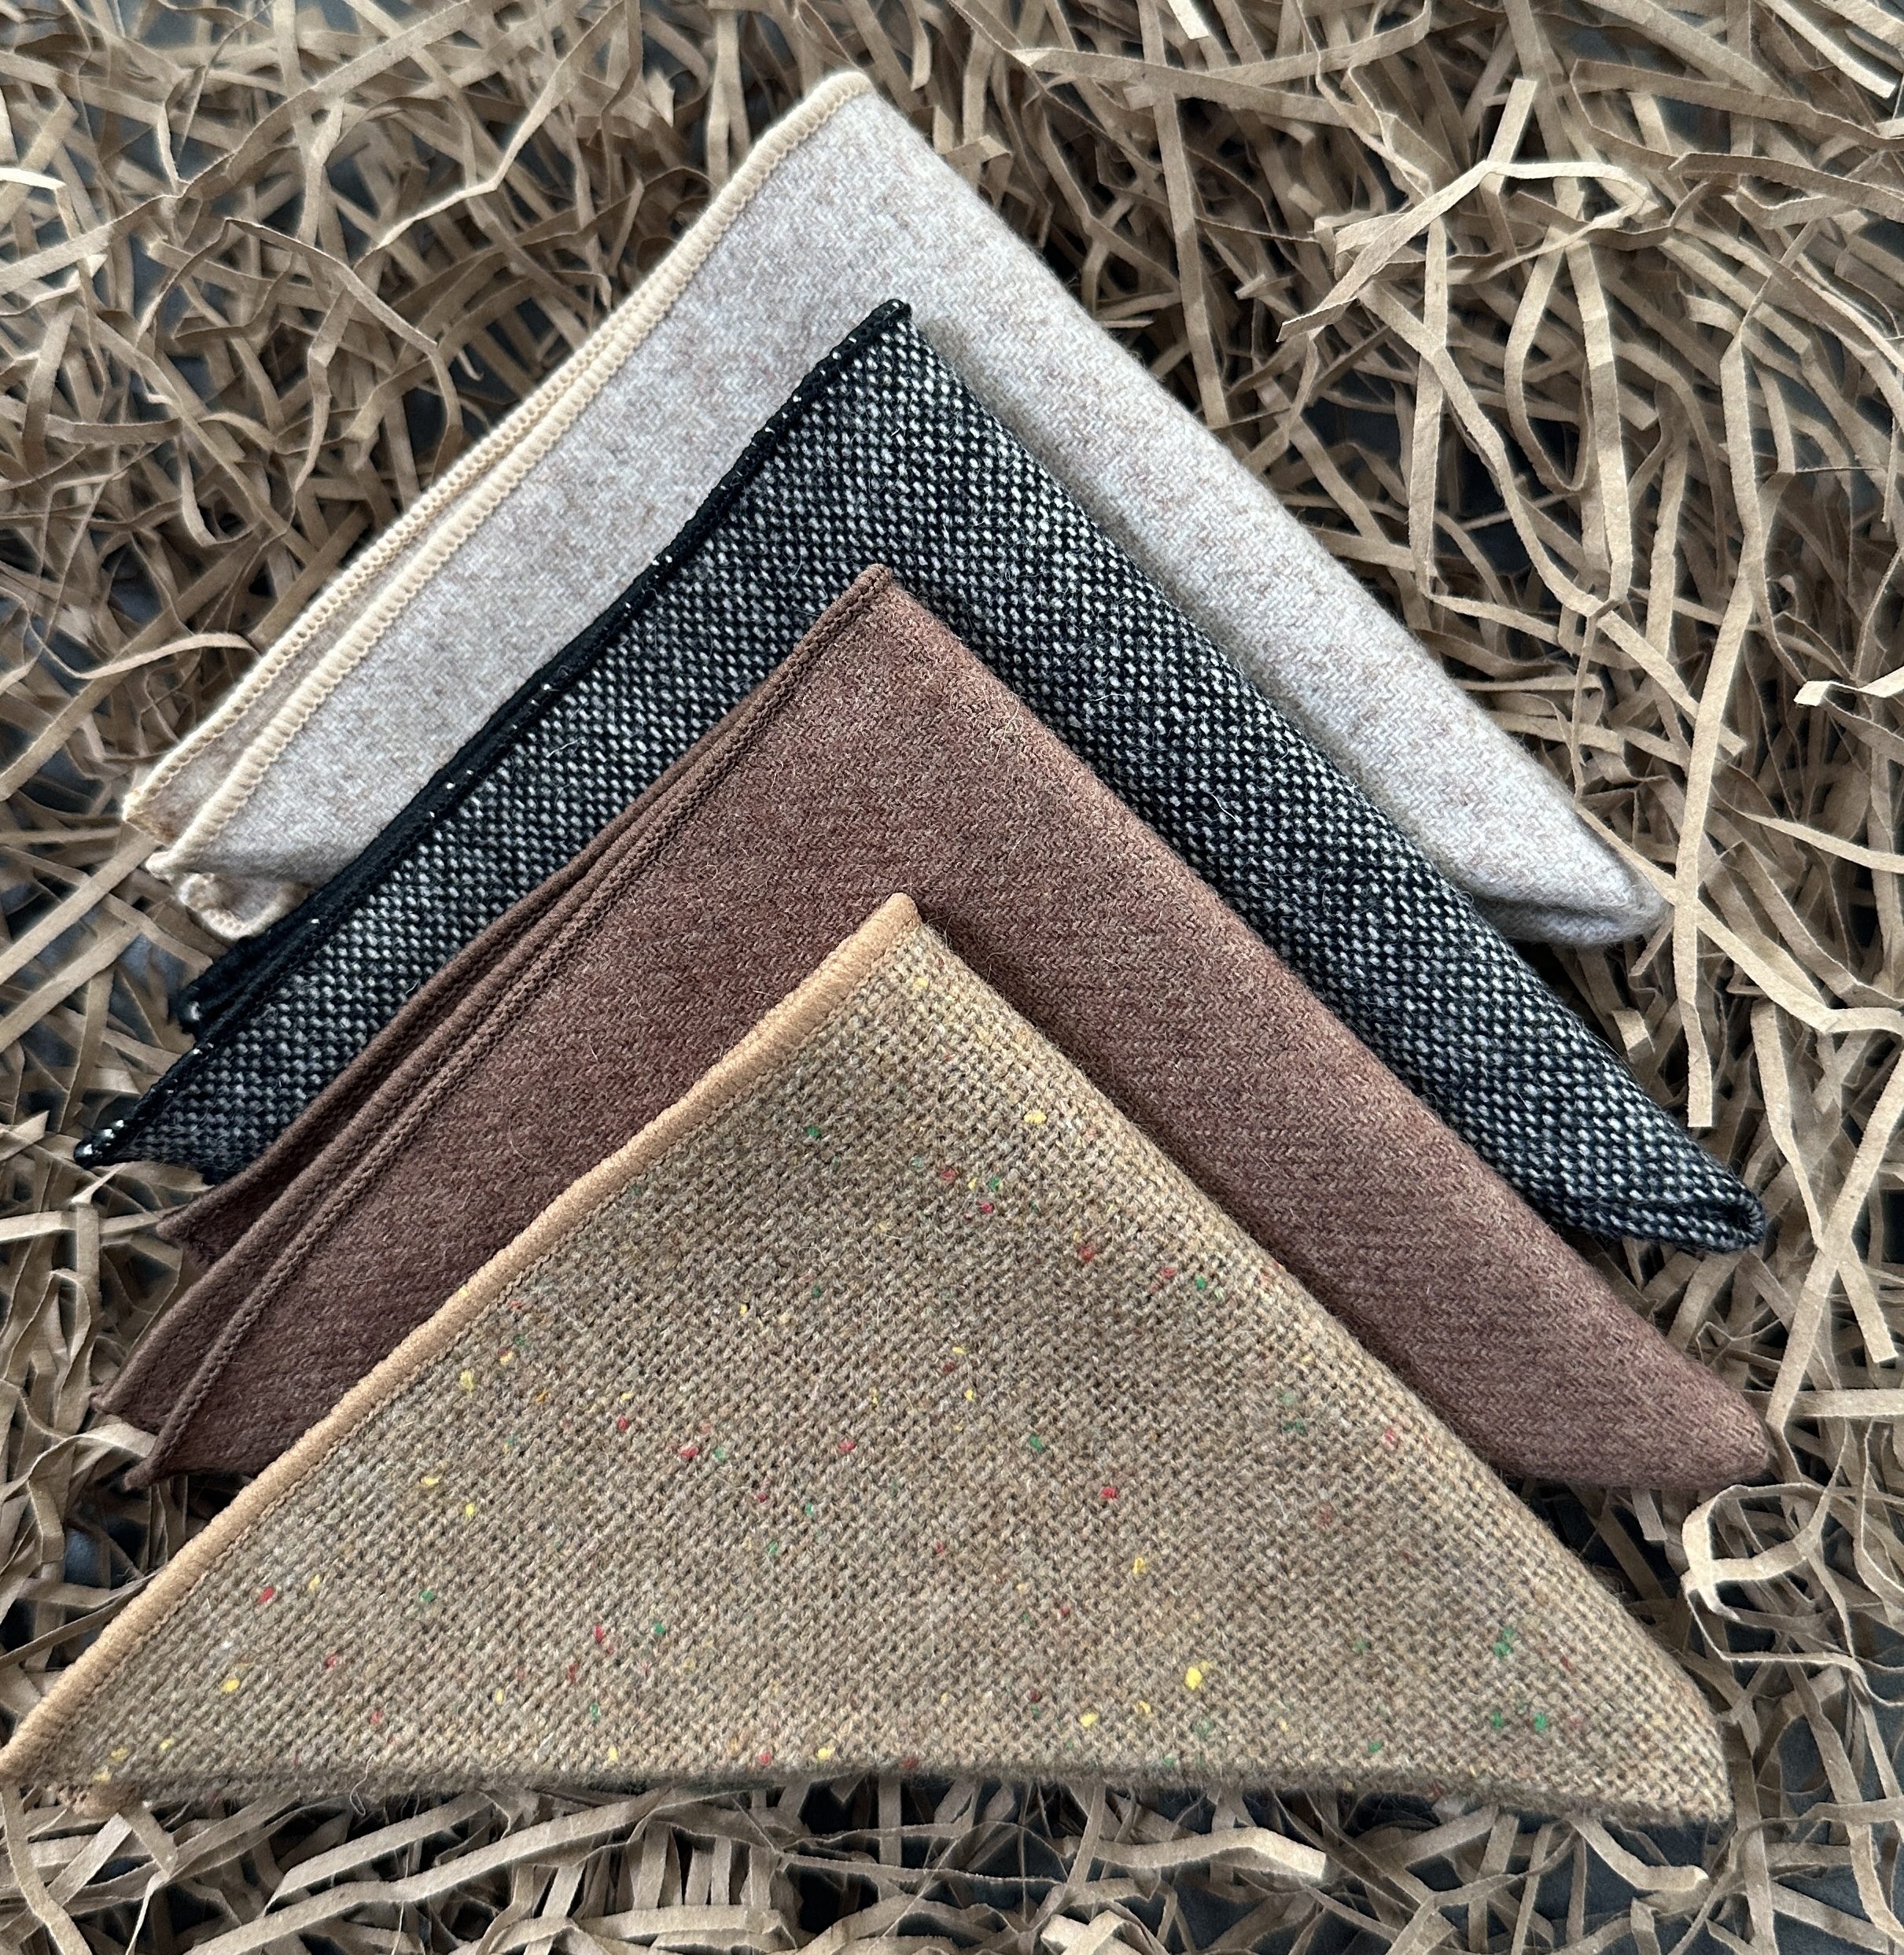 A set of four mens pocket handkerchiefs in brown and grey wool ideal for men's gifts and groomsmen gifts.